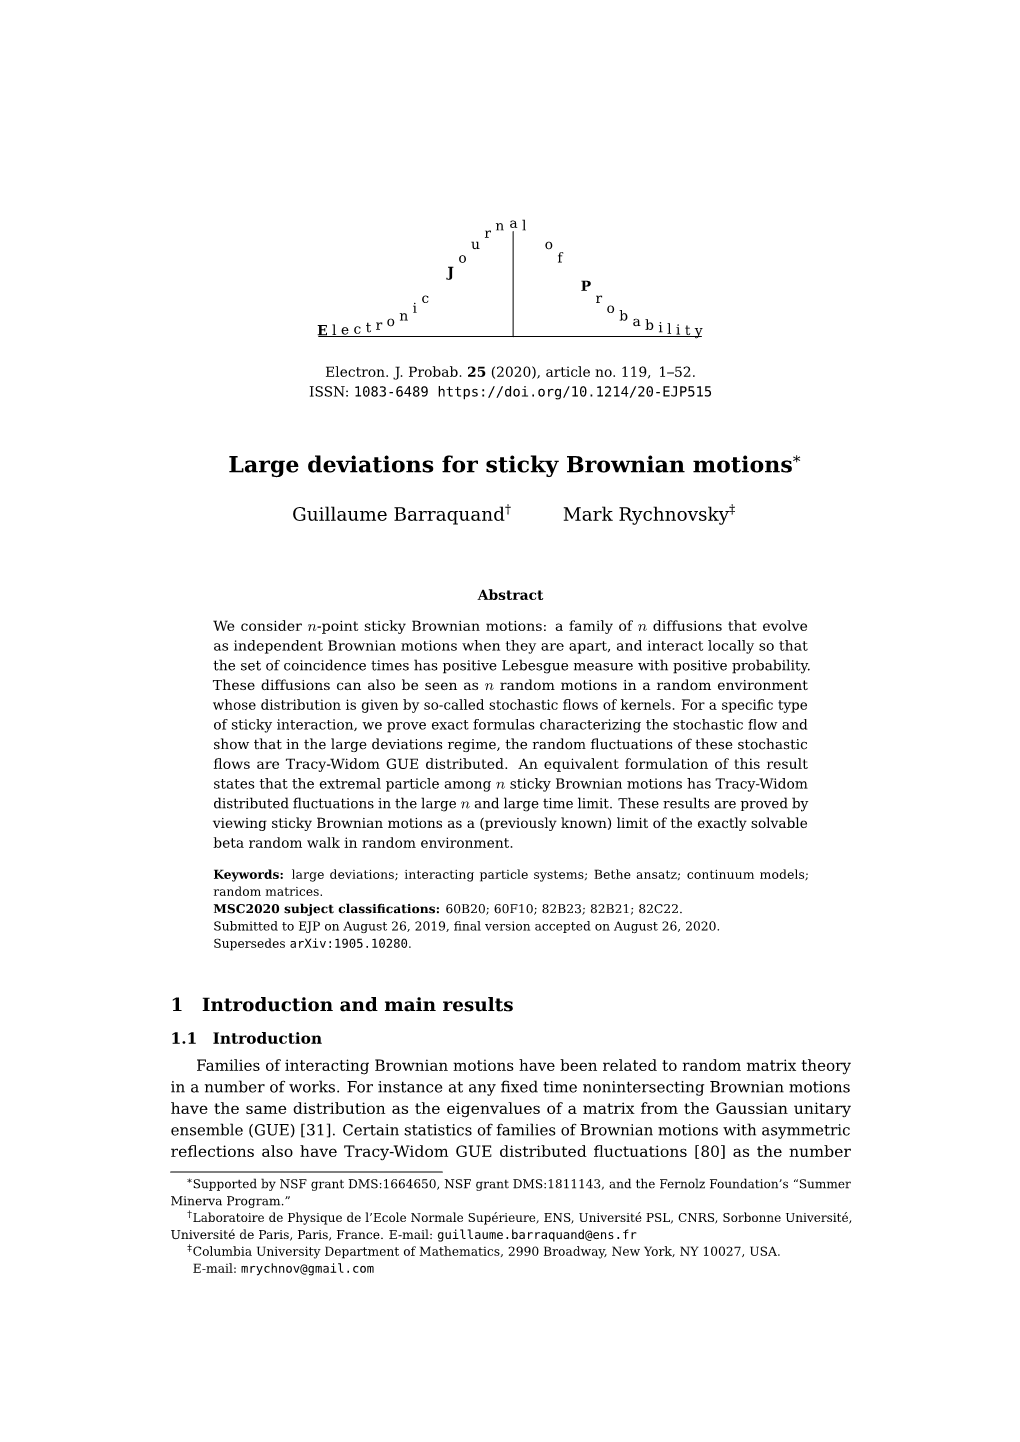 Large Deviations for Sticky Brownian Motions*